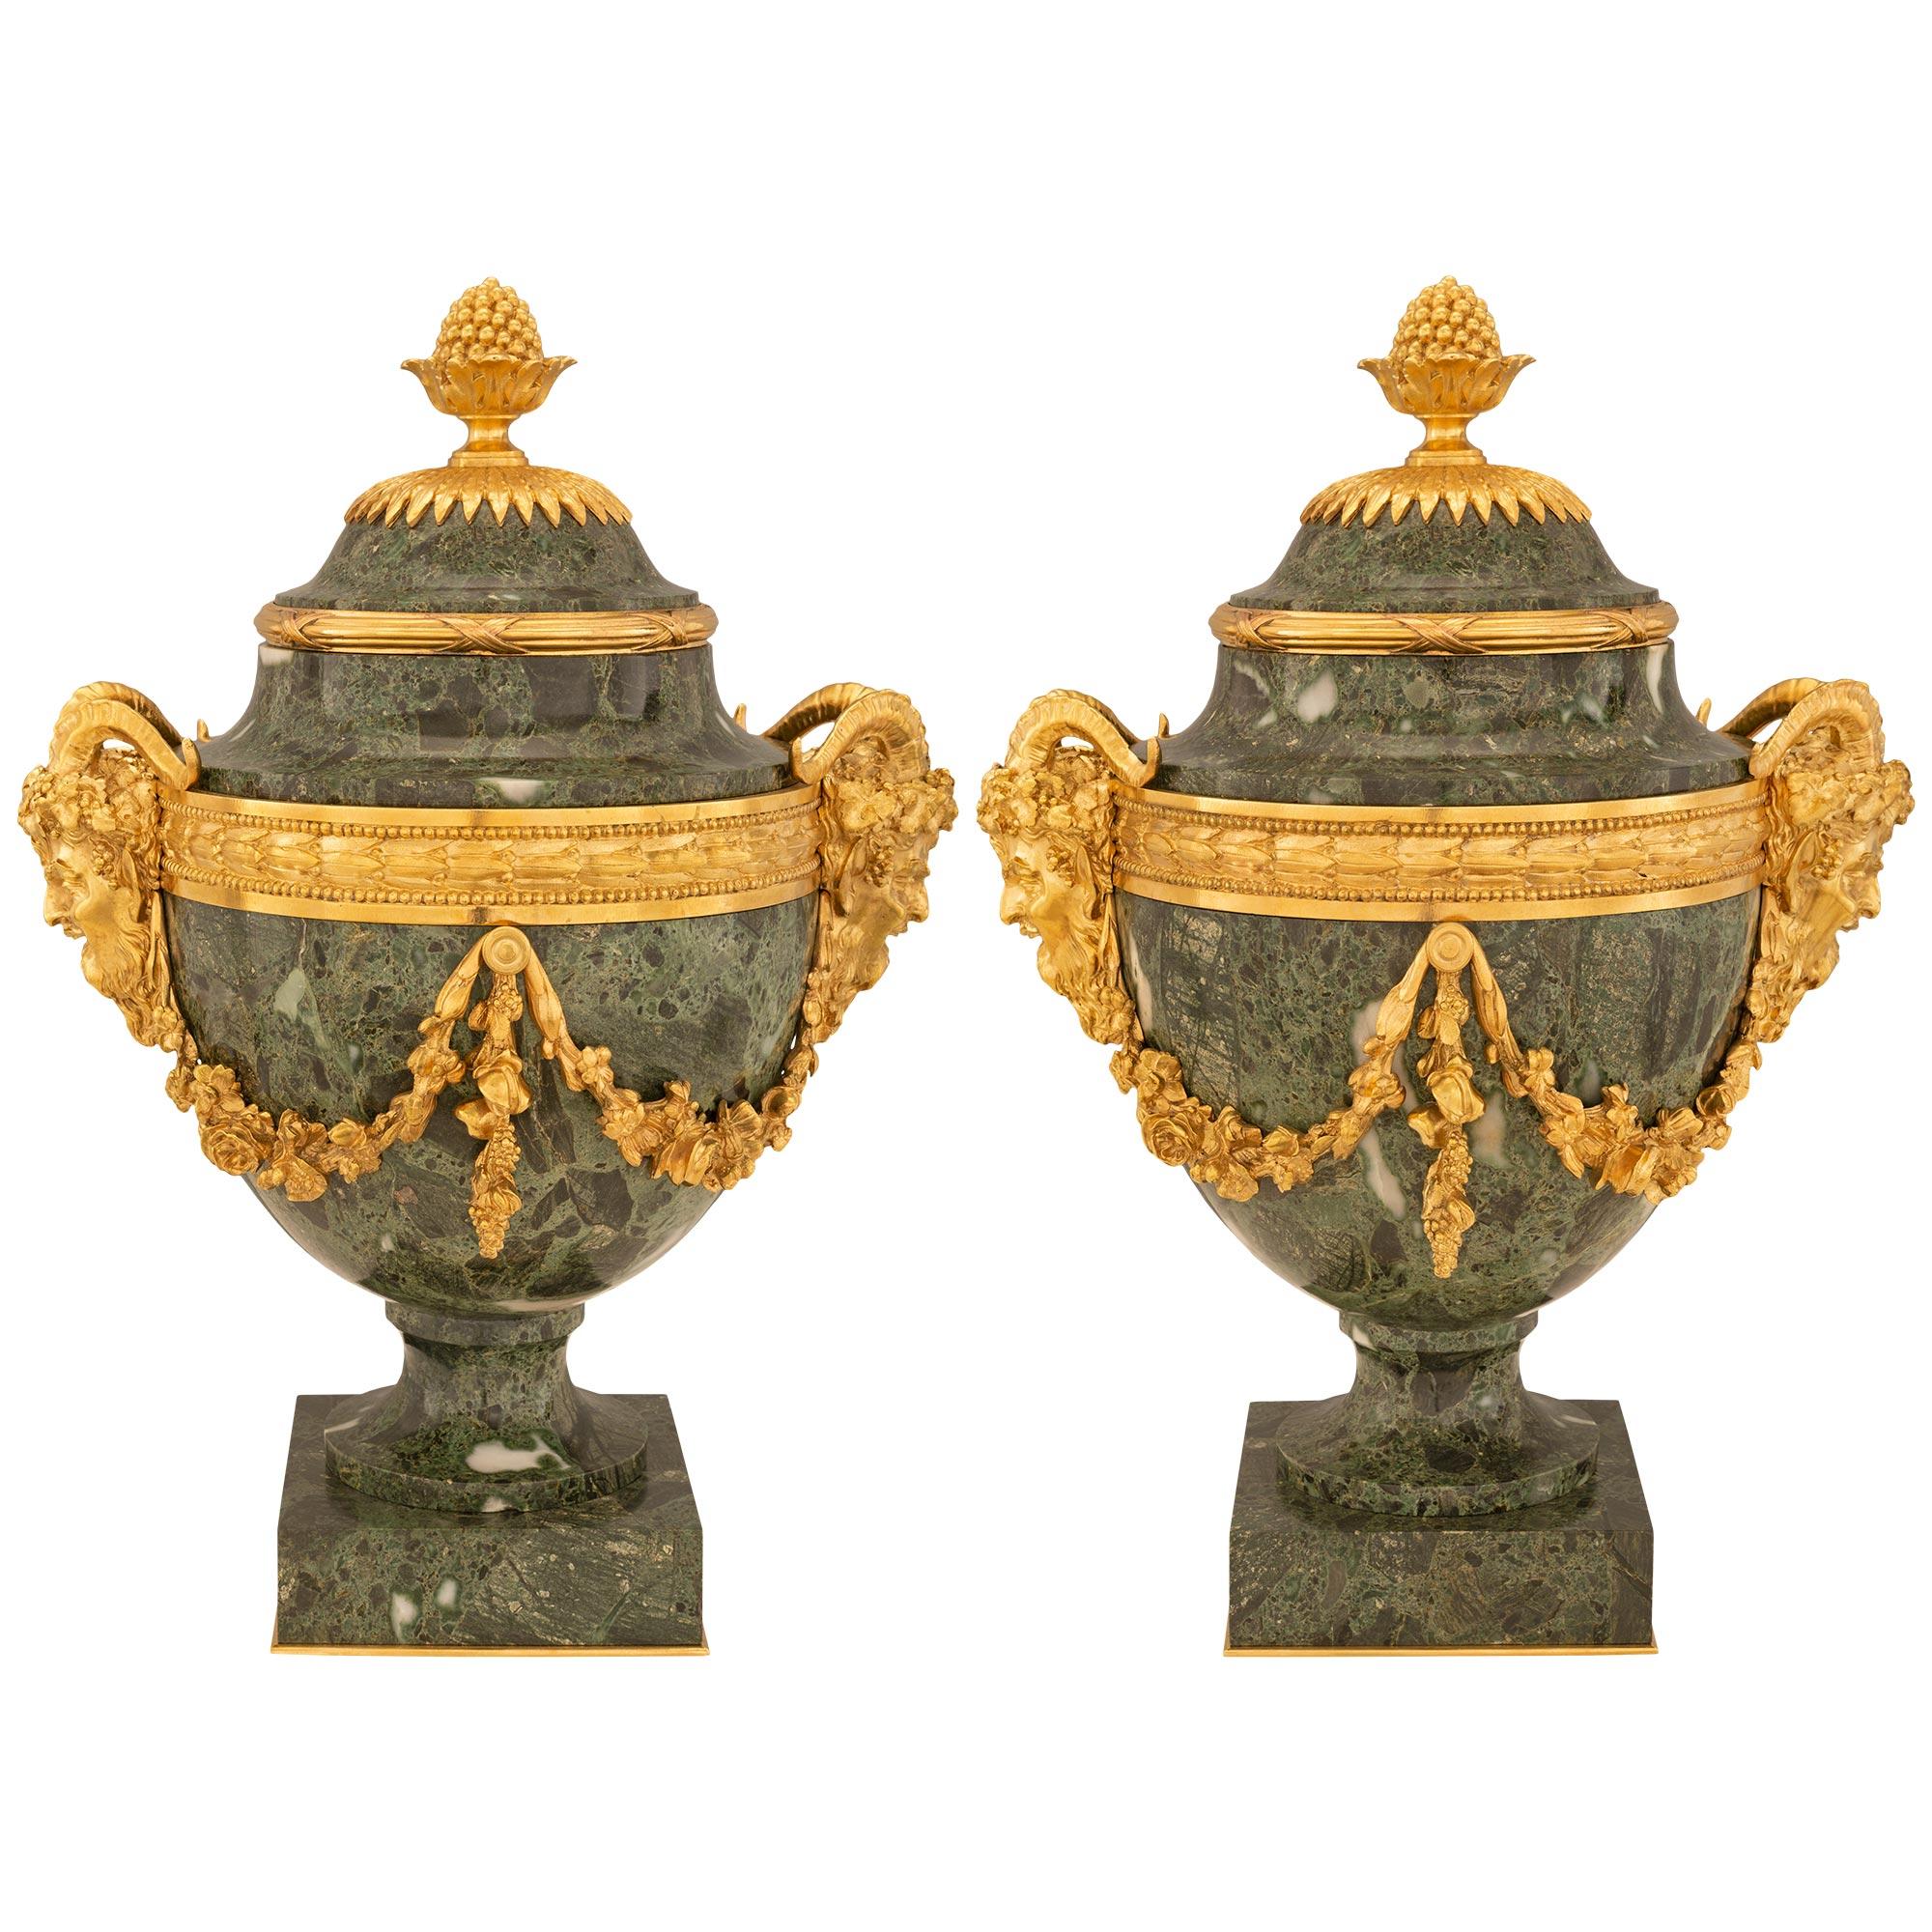 Pair of French 19th Century Belle Époque Period Marble and Ormolu Urns For Sale 6